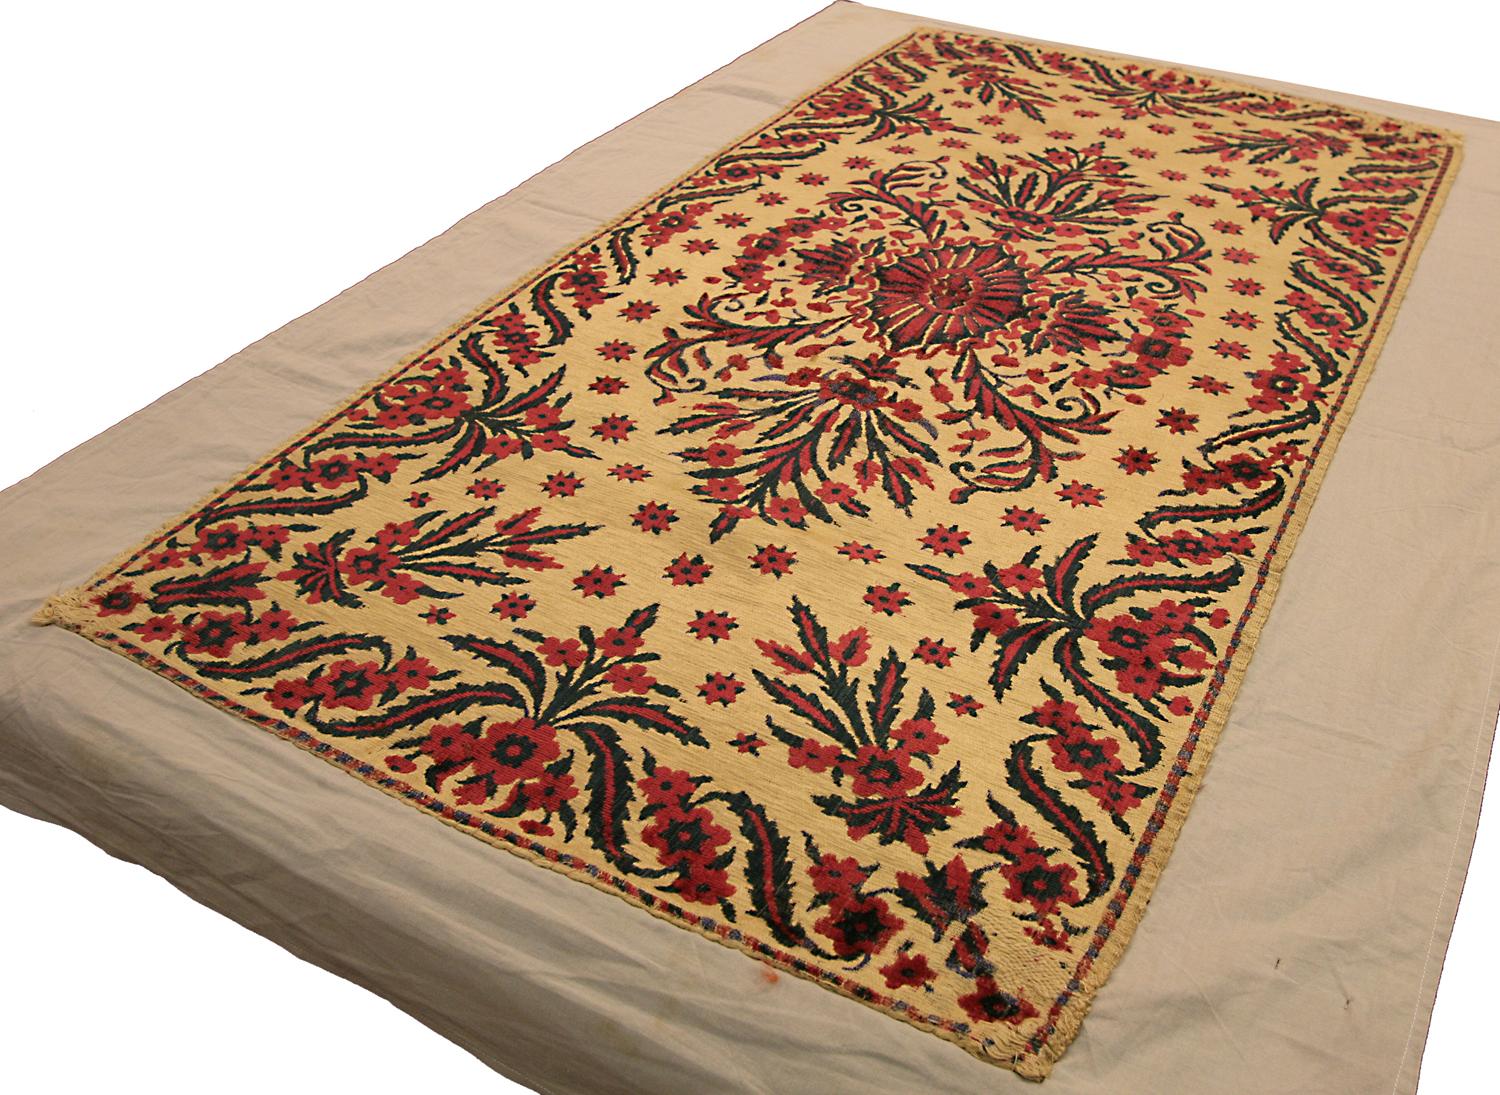 Other Antique Turkish Ottoman Beige Background Color Textile, 19th Century For Sale